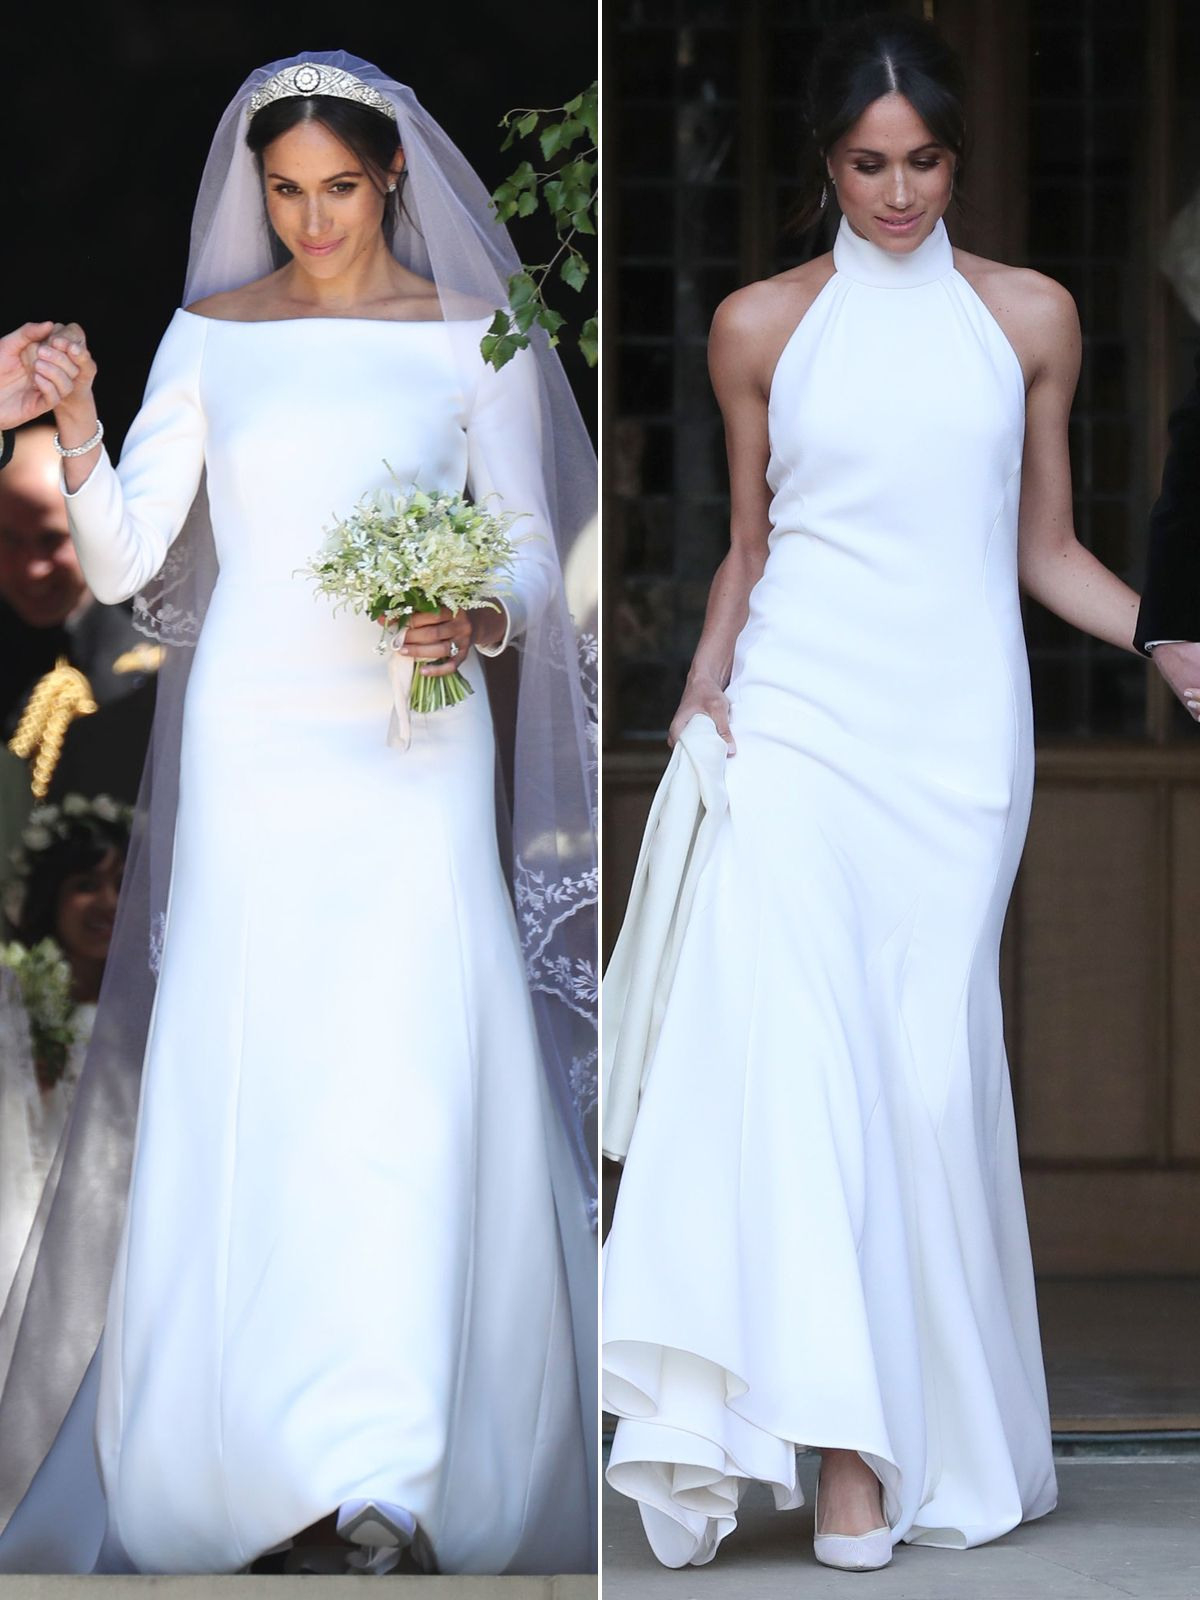 Day To Night! Comparing Meghan Markle's First And Second